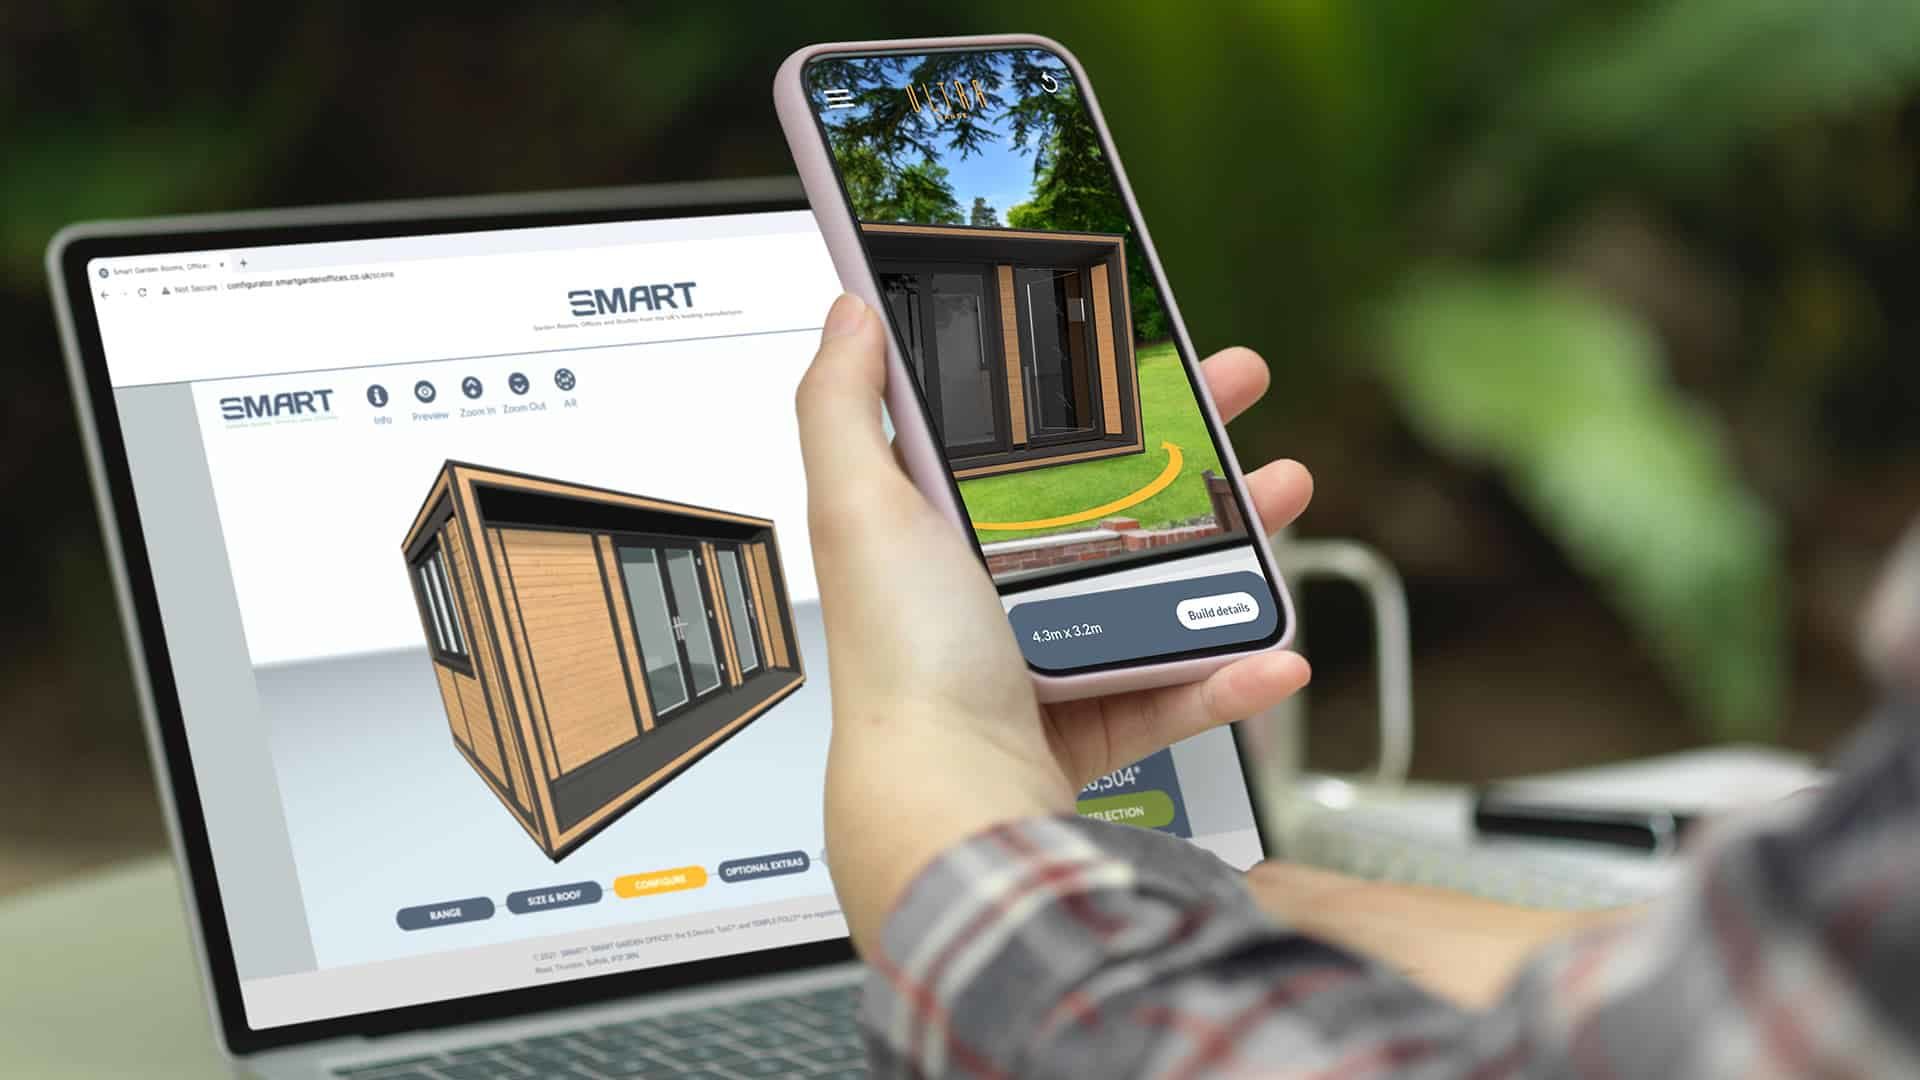 The Smart Garden configurator app being used on laptop and smartphone.